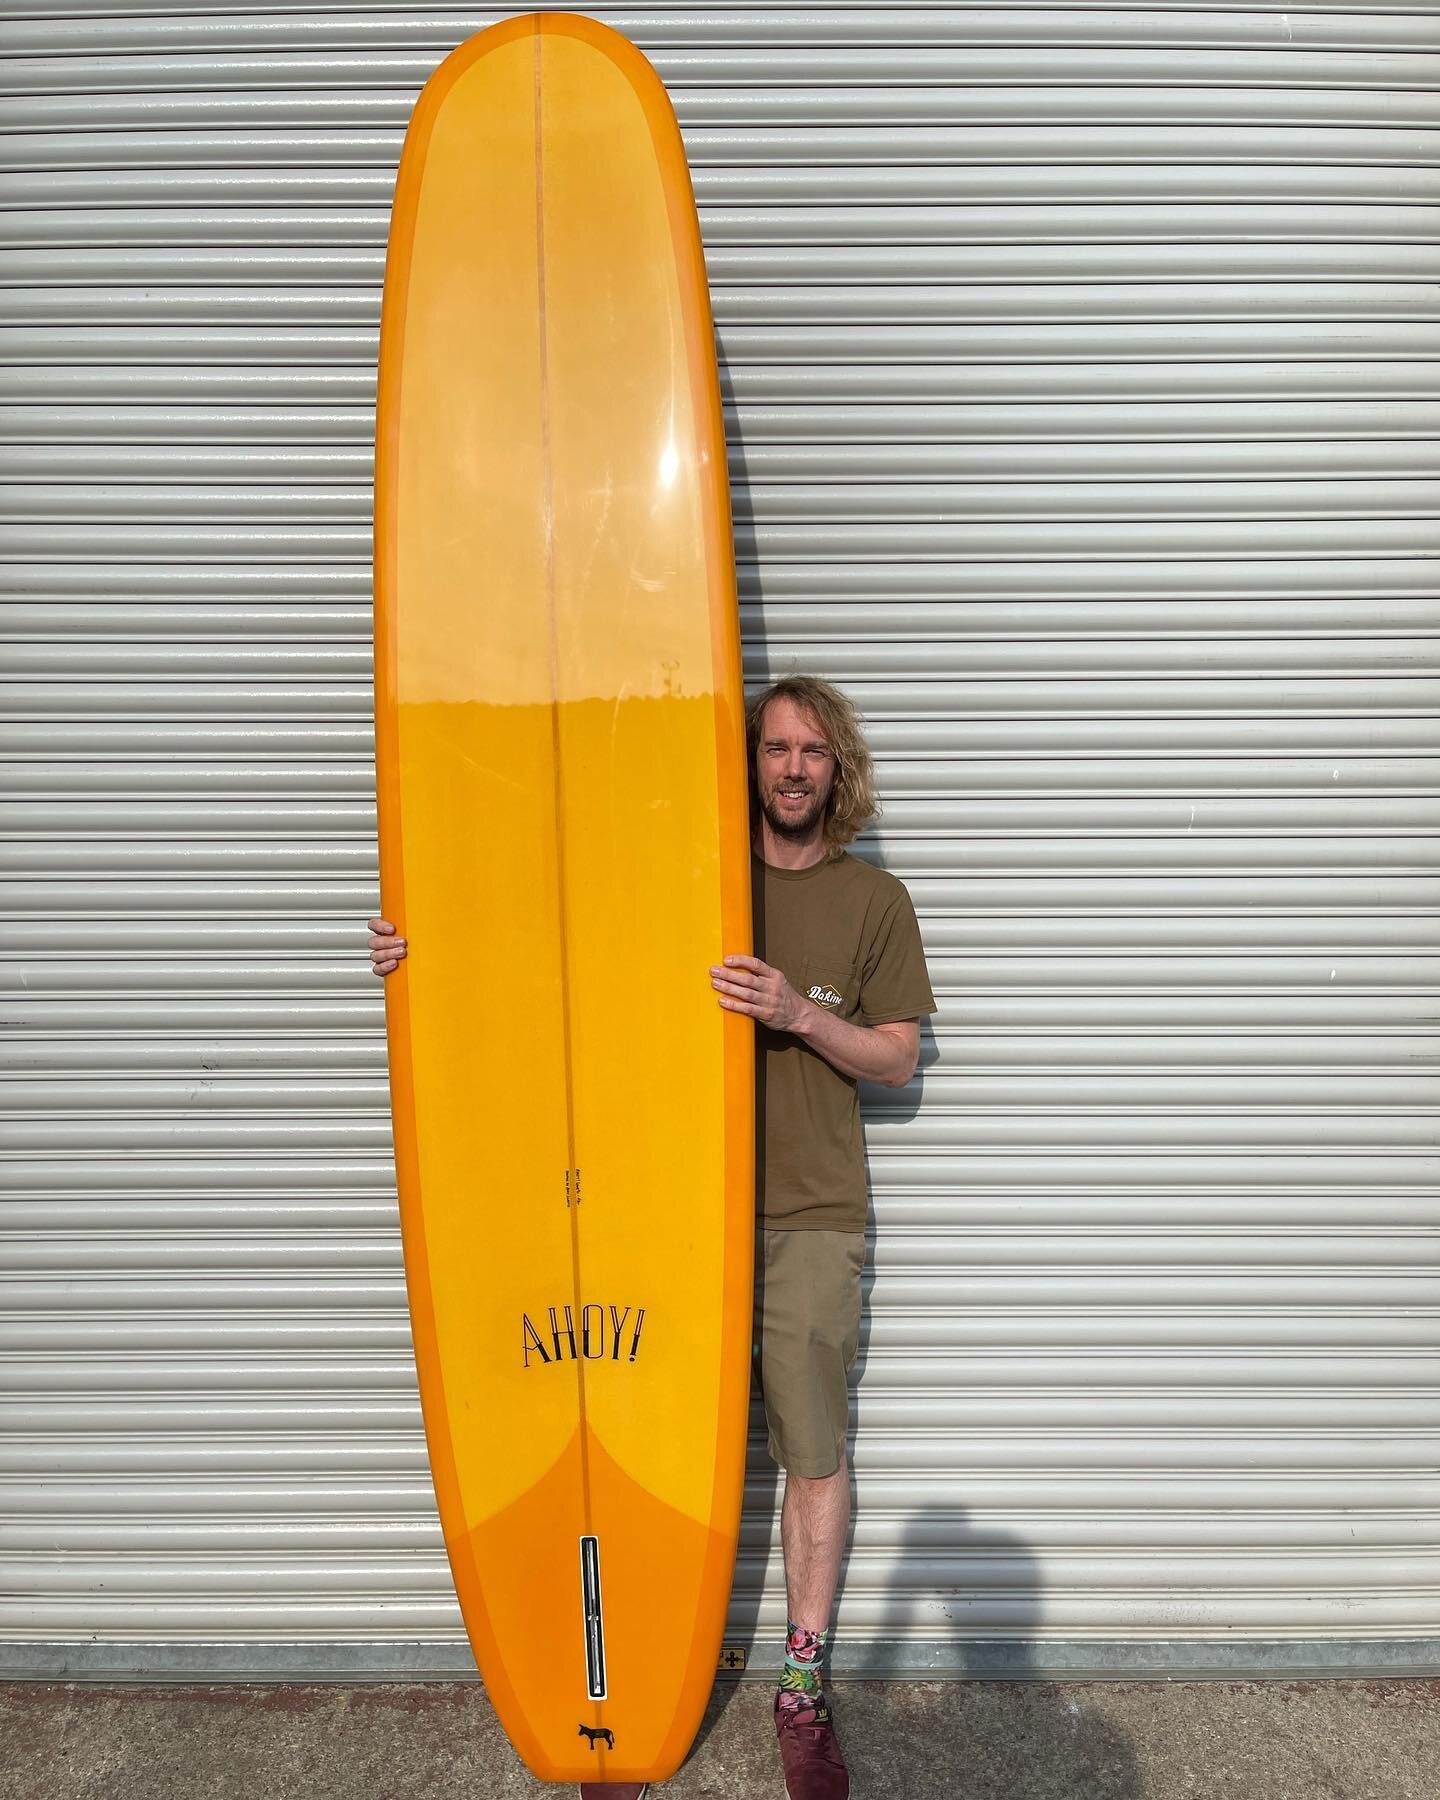 Adam @fatbez with his fresh &lsquo;long nines&rsquo; hand shaped in Dorset, laminated by Jack @mulehouseglassing in Cornwall 🏴&zwj;☠️ pictured at @sea_monster_supply_co 🦑

#ahoysurfcraft #longnines #noserider #longboard #handshaped